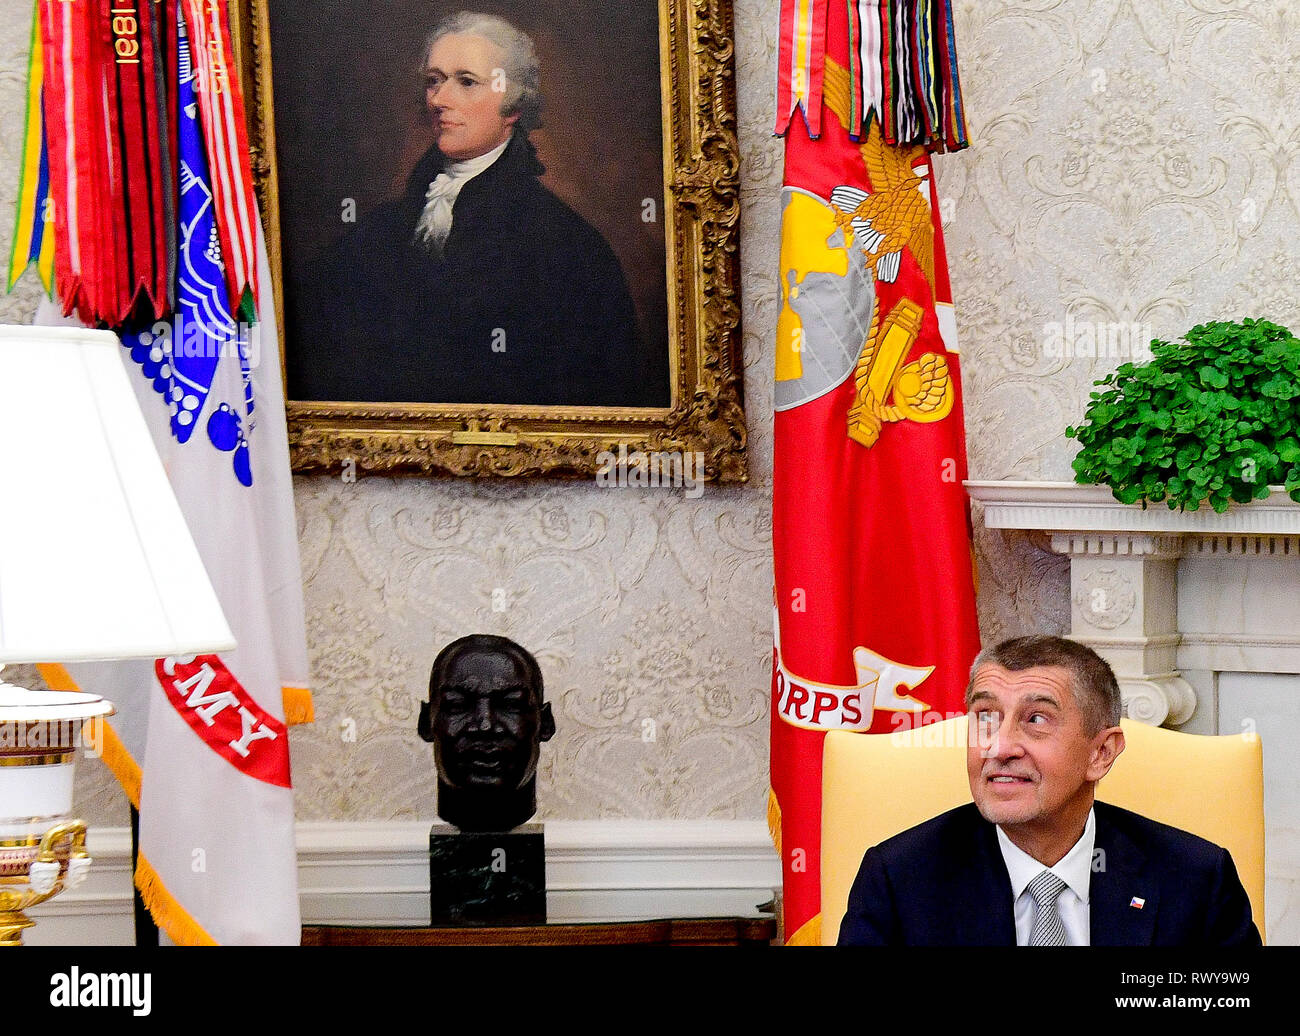 Washington, United States. 07th Mar, 2019. US President Donald Trump, not on the photo, and Czech Prime Minister Andrej Babis meet journalists in Oval Office of the White House in Washington, USA, March 7, 2019. Credit: Roman Vondrous/CTK Photo/Alamy Live News Stock Photo